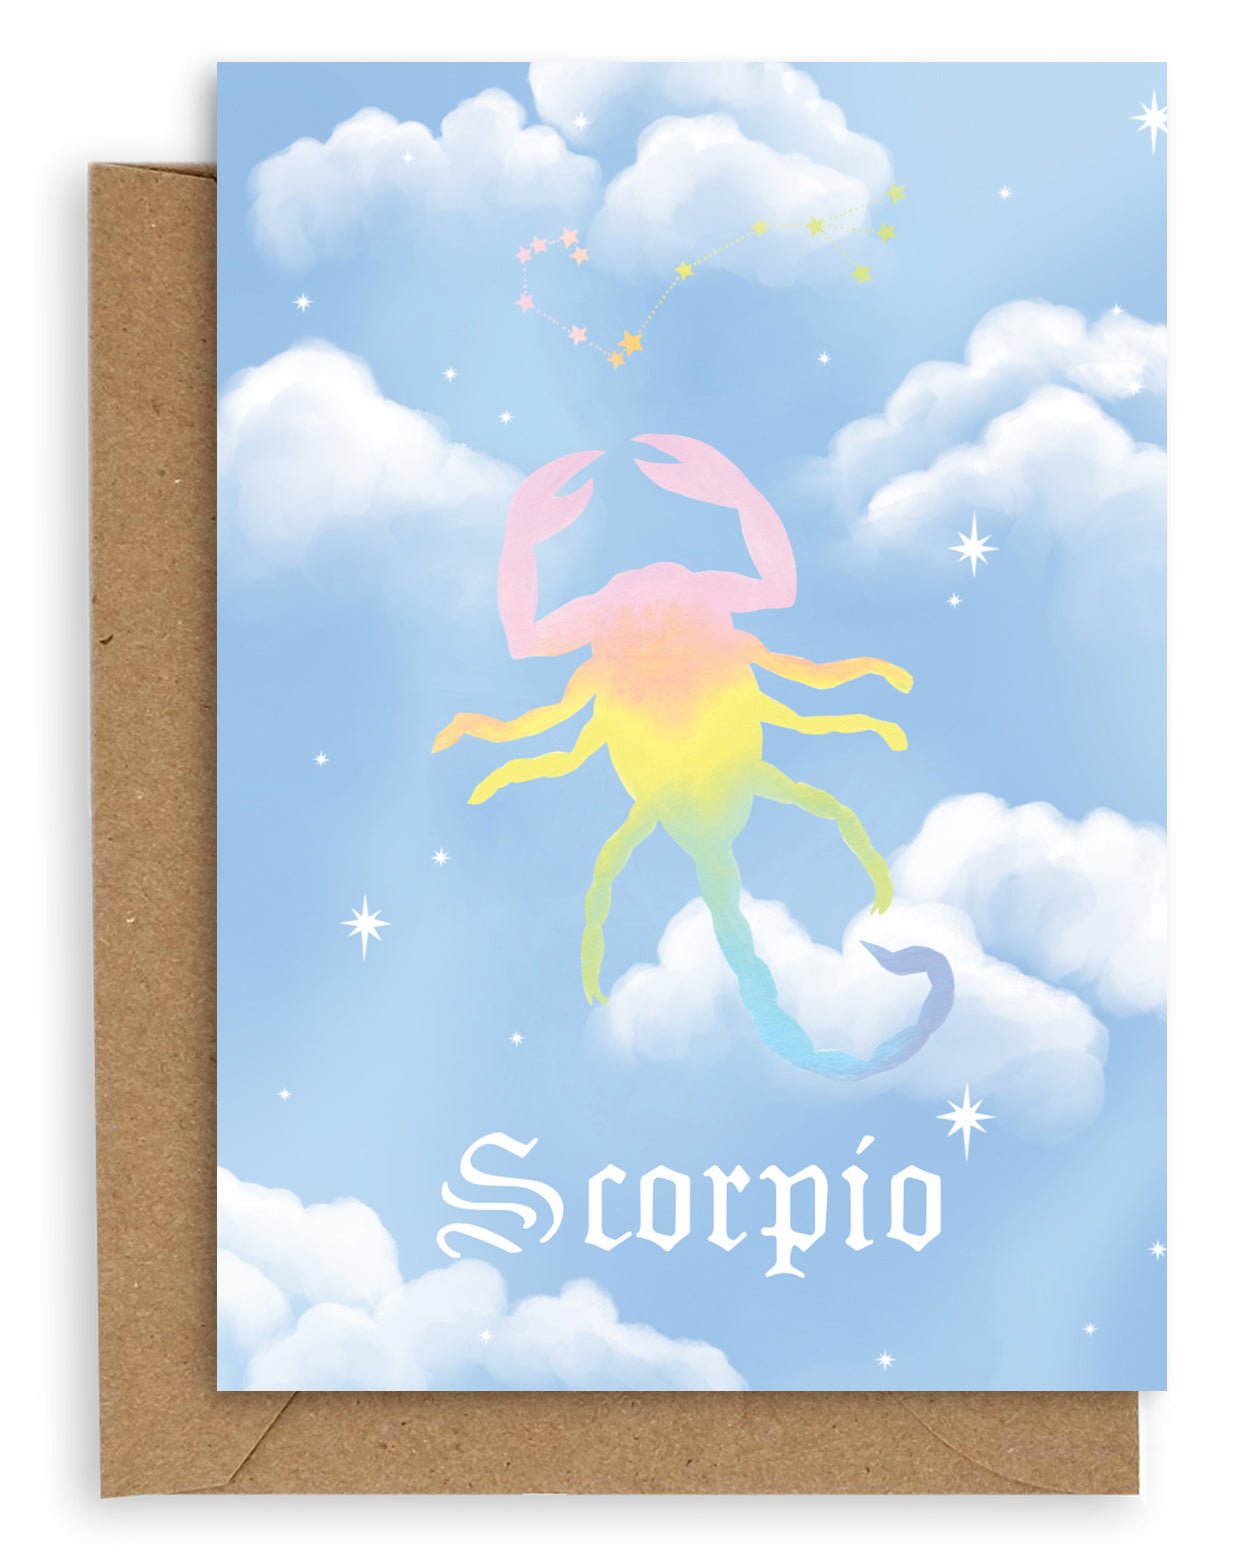 Scorpio  Horoscope card with a kraft envelope. The horoscope symbol is painted in rainbow pastel on a blue background with white clouds. 